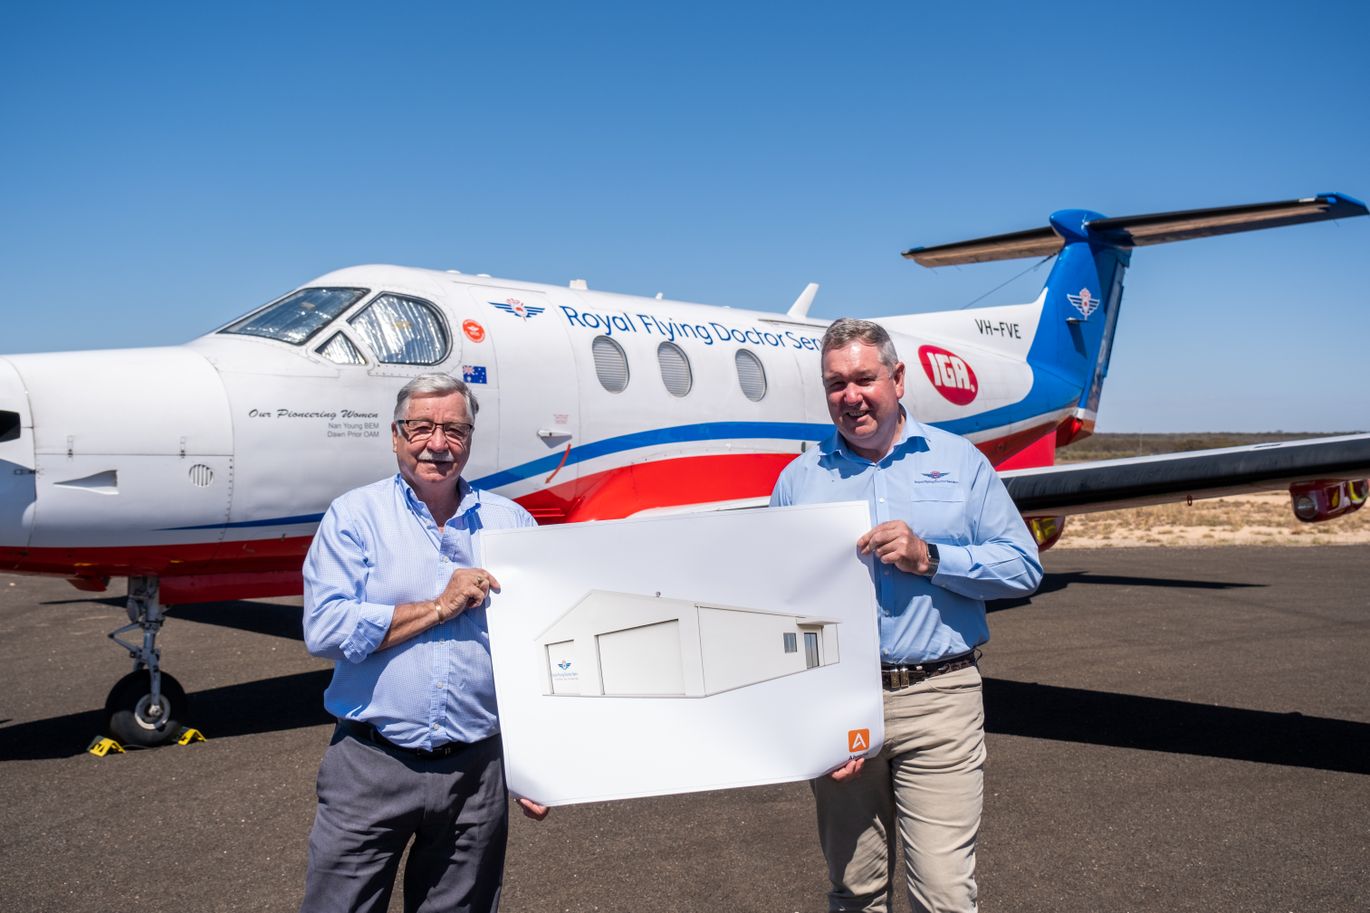 RFDS Renmark Patient Transfer Facility